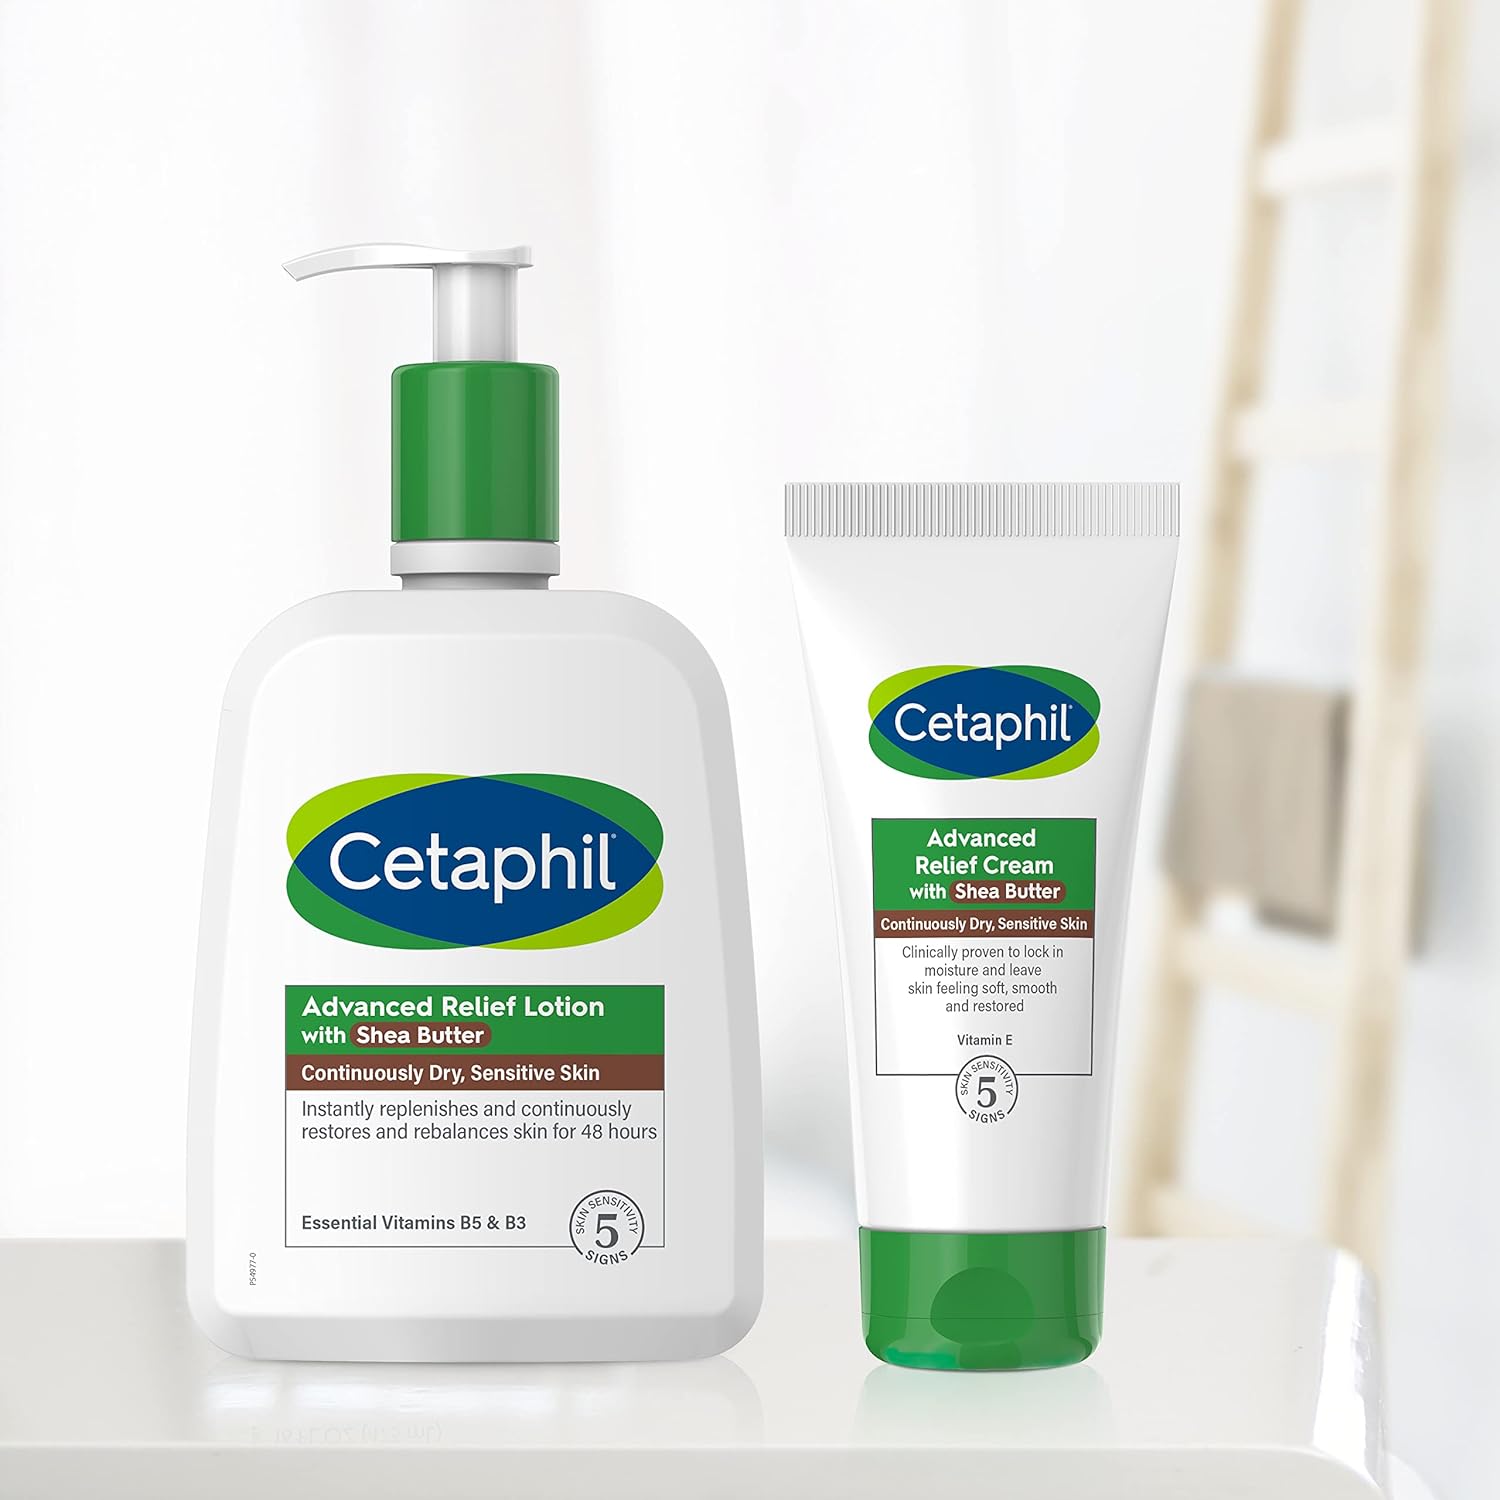 Cetaphil Advanced Relief Cream with Shea Butter, 6 oz, For Continuously Dry, Sensitive Skin, Mother's Day Gifts, 48Hr Hydration, All Skin Tones & Types, Hypoallergenic (Packaging May Vary) : Beauty & Personal Care